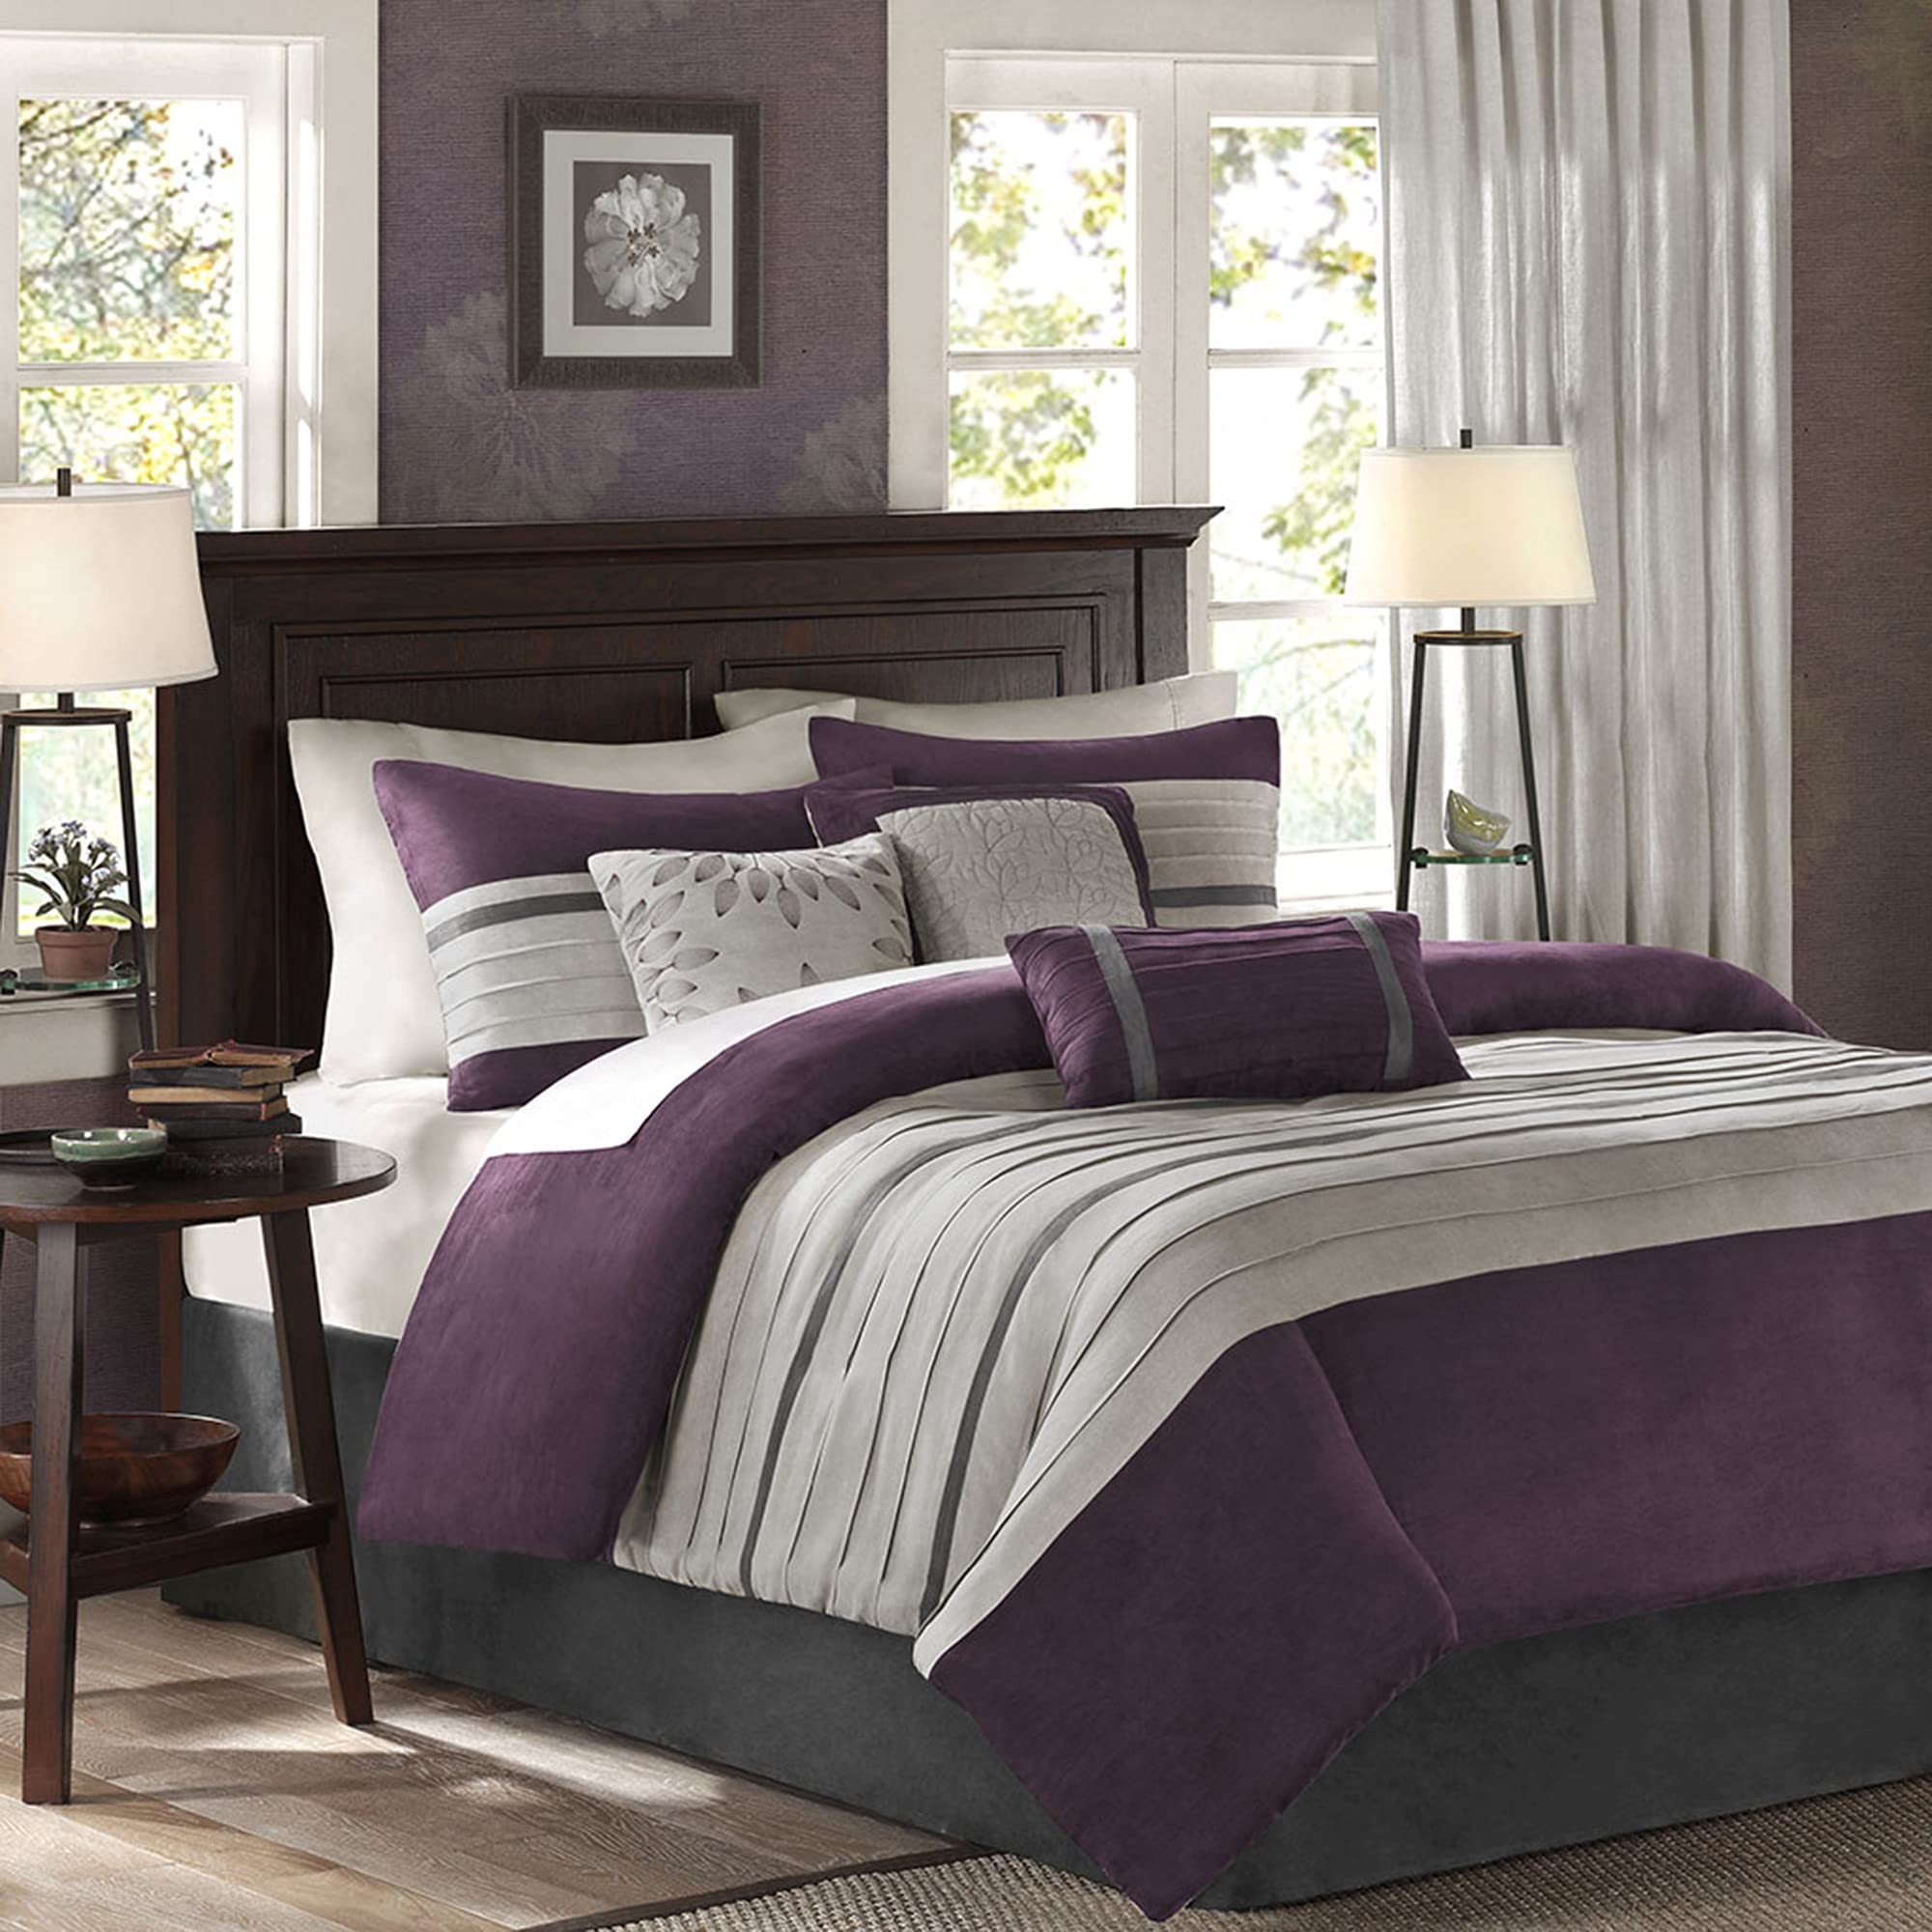 Book Cover Madison Park Palmer Comforter Set - Faux Suede Design, Striped Accent, All Season Down Alternative Bedding, Matching Shams, Decorative Pillow, Bed Skirt, King (104 in x 92 in), Purple 7 Piece Purple King (104 in x 92 in)